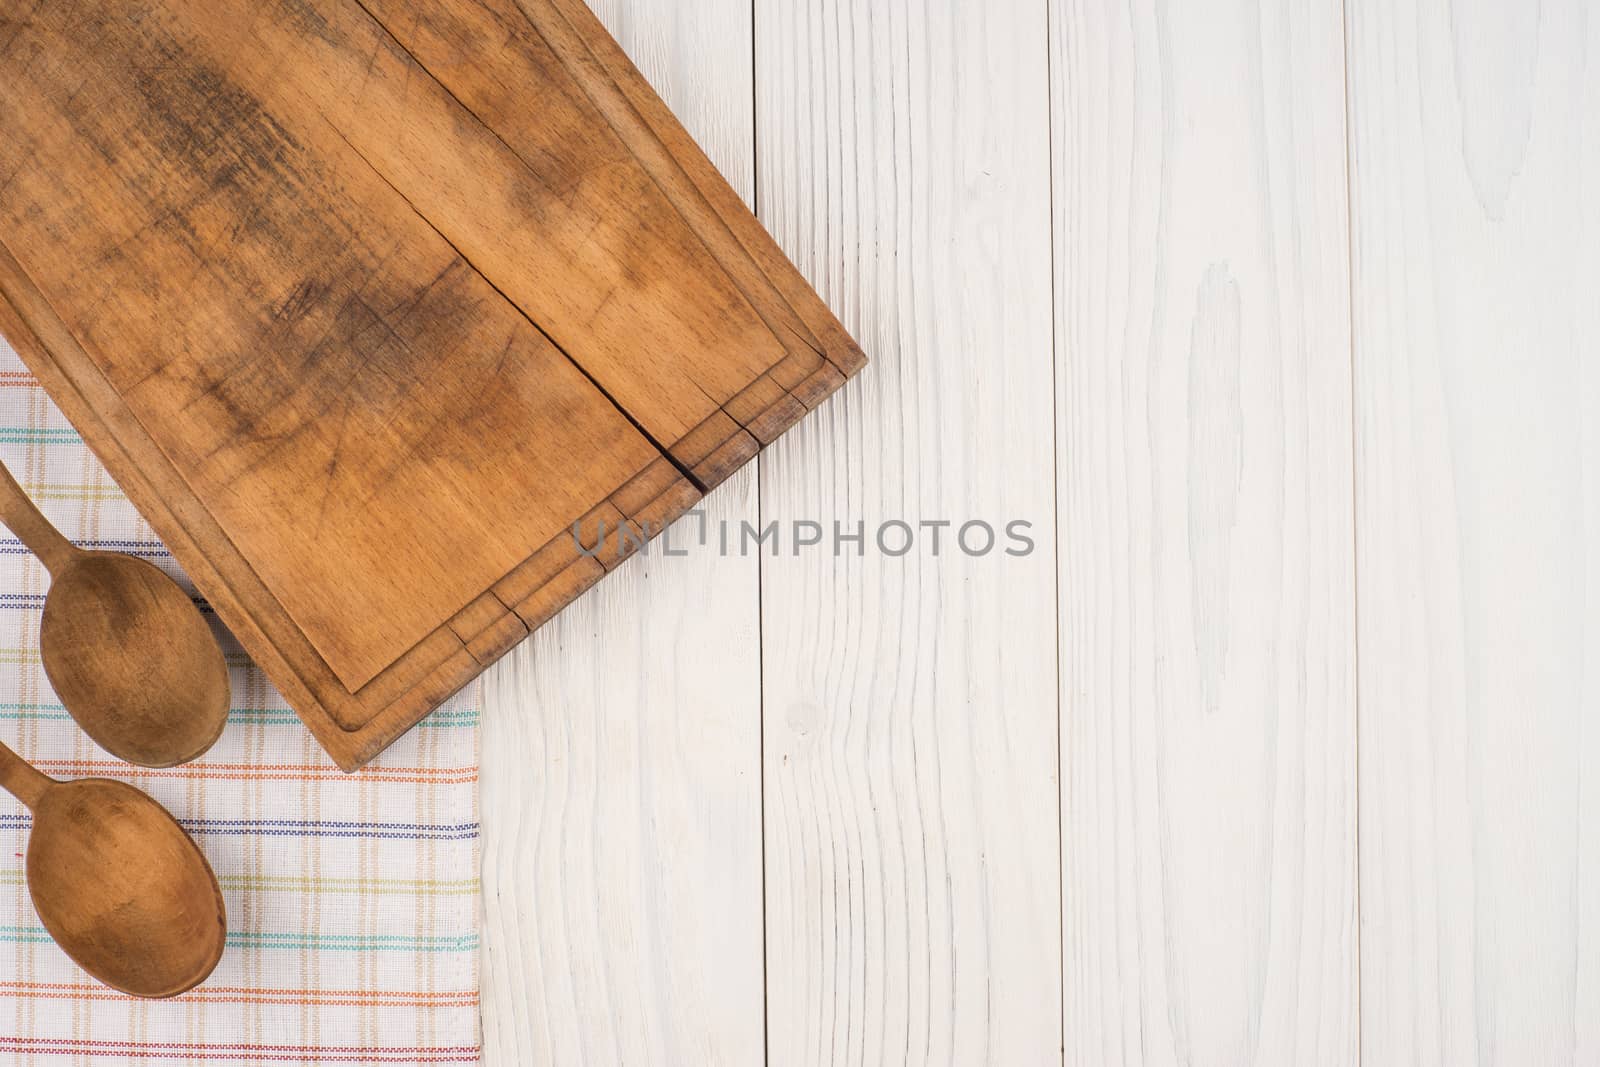 Cutting board and a spoon on a kitchen napkin on old wooden tabl by DGolbay